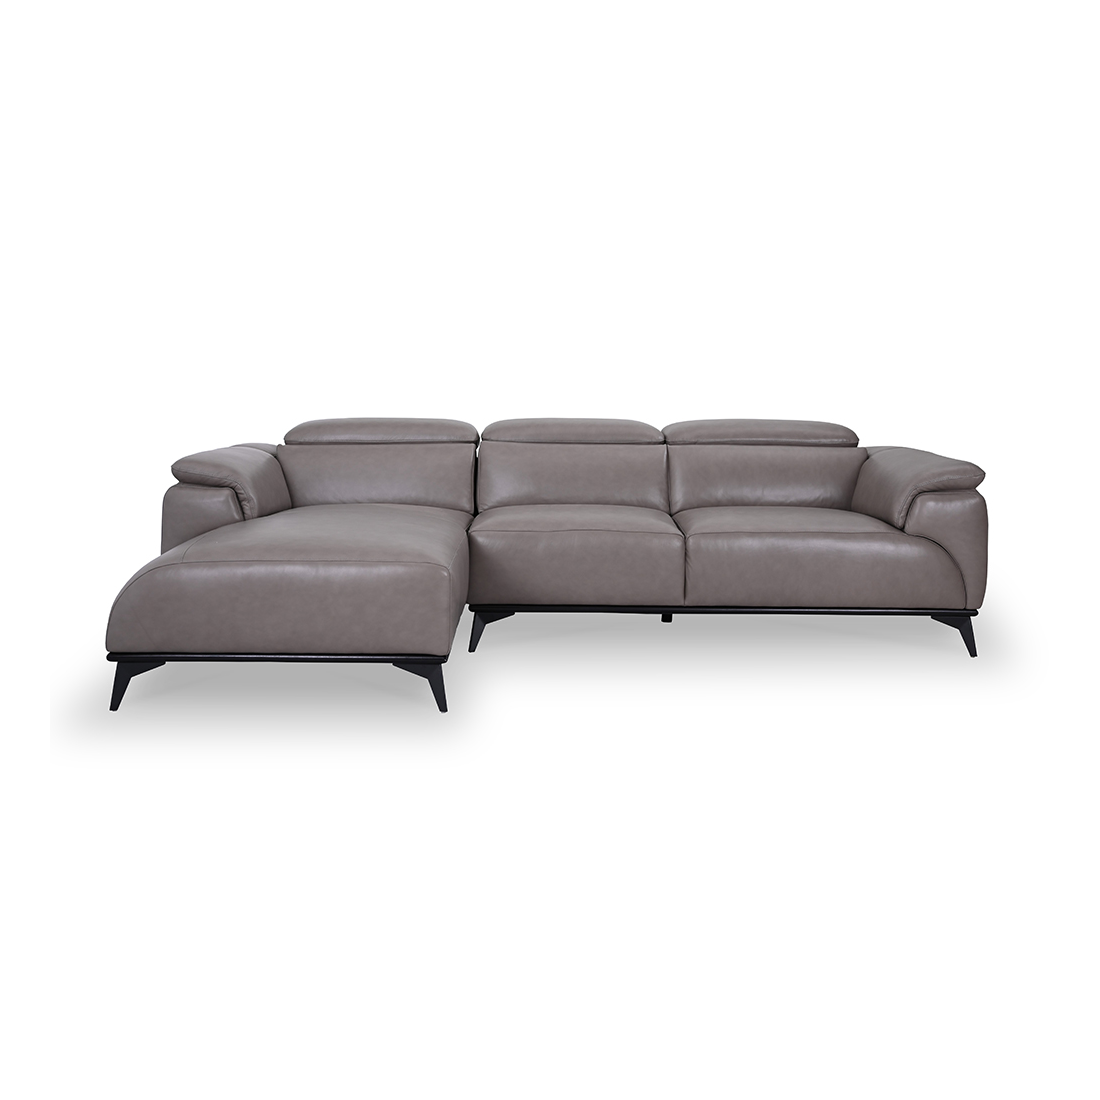 Mayfair Grey Leather Chaise Lounge